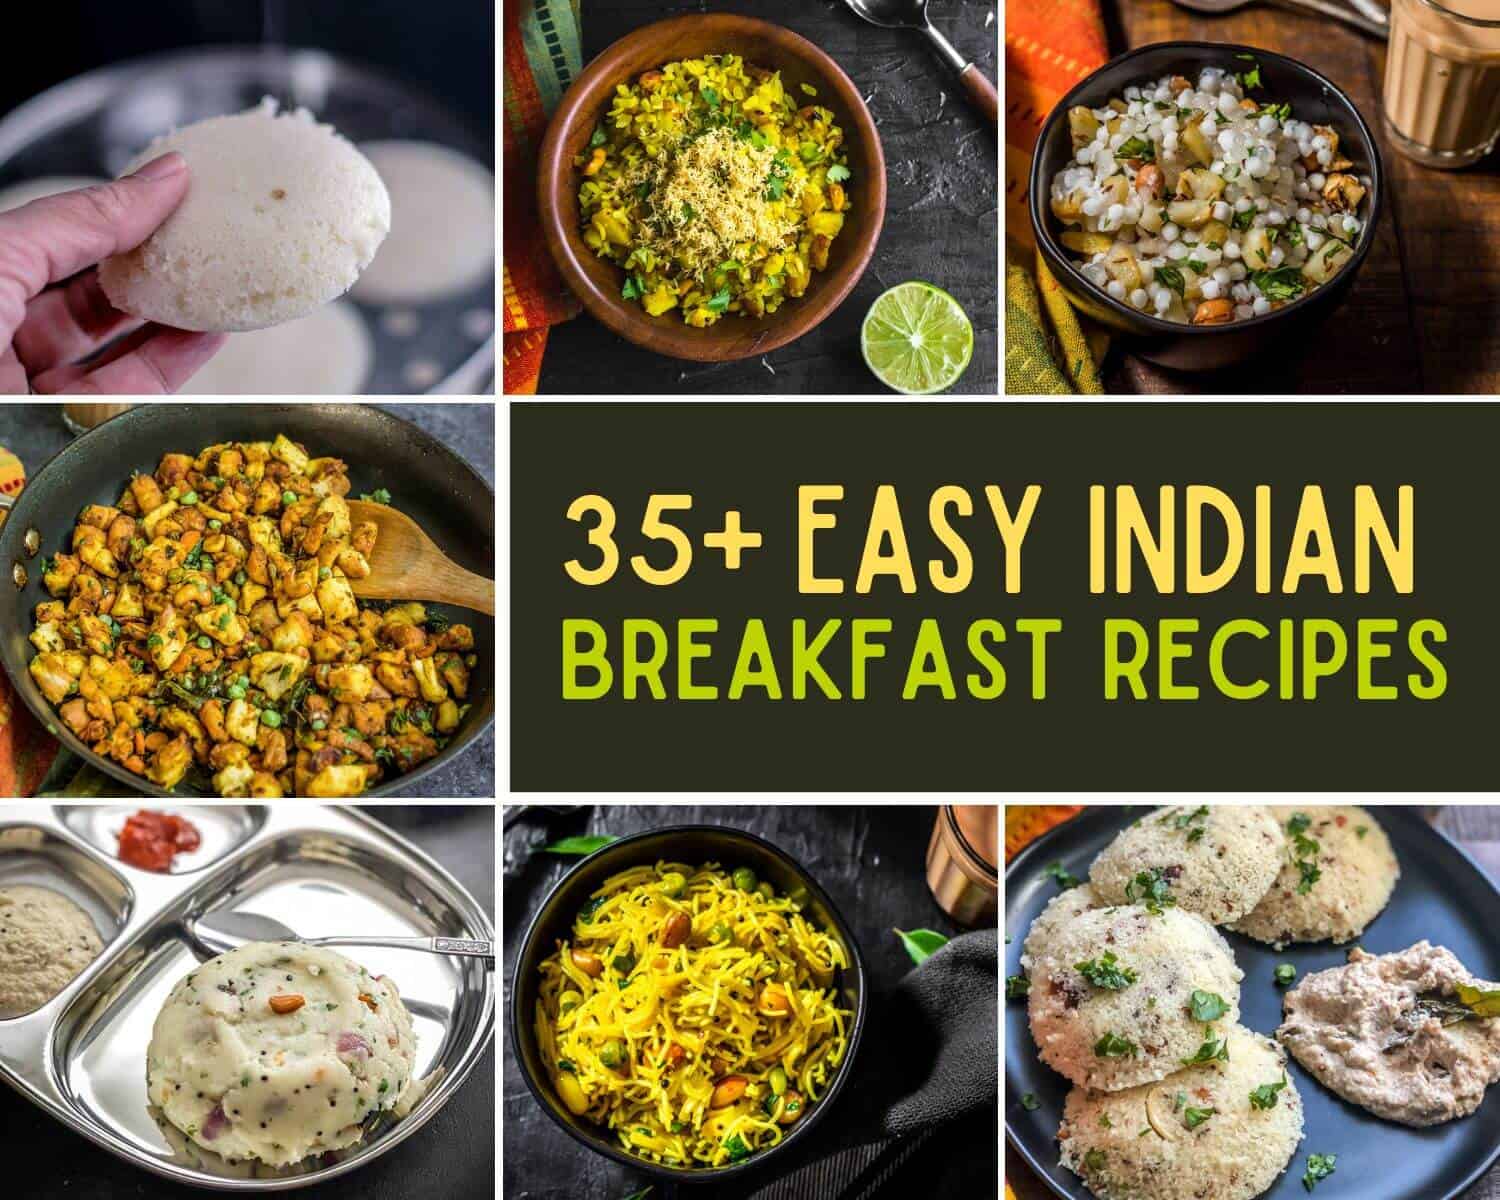 A collage of 4 images with caption 35+ Easy Indian Breakfast Recipes